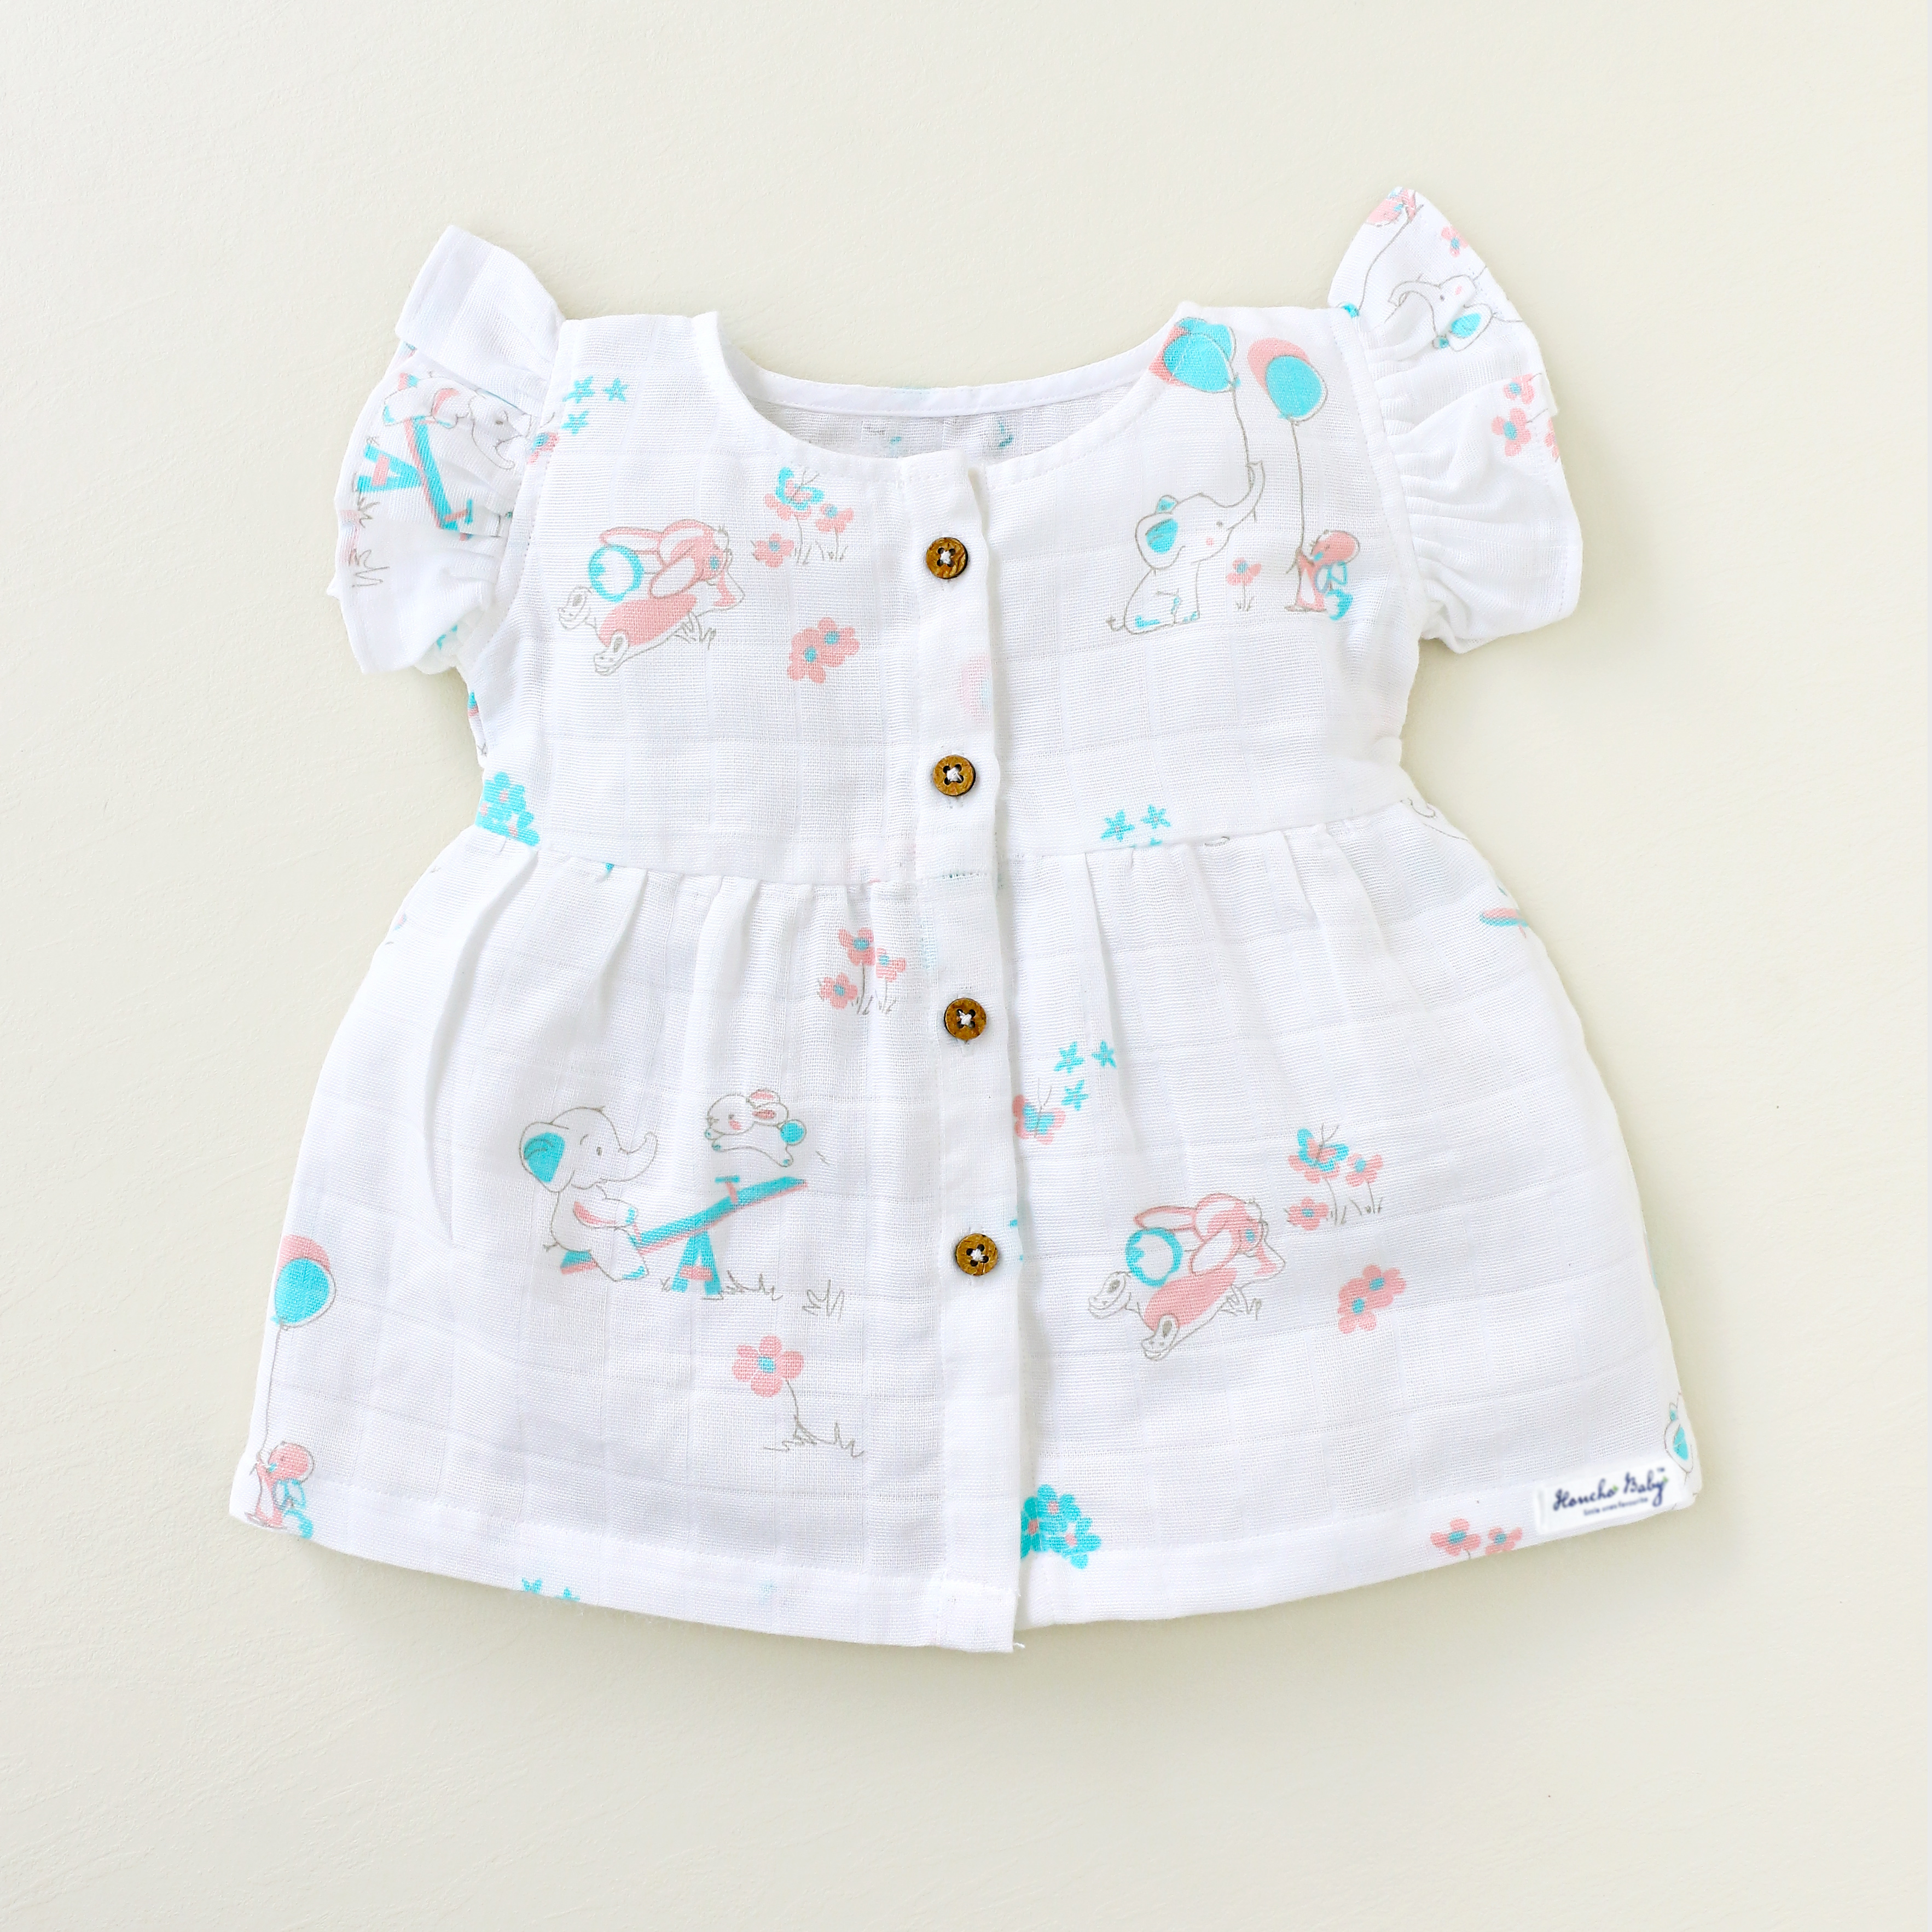 Meet Baggy & Hopps at the park - Muslin Baby Frock ( 0 to 18 months )